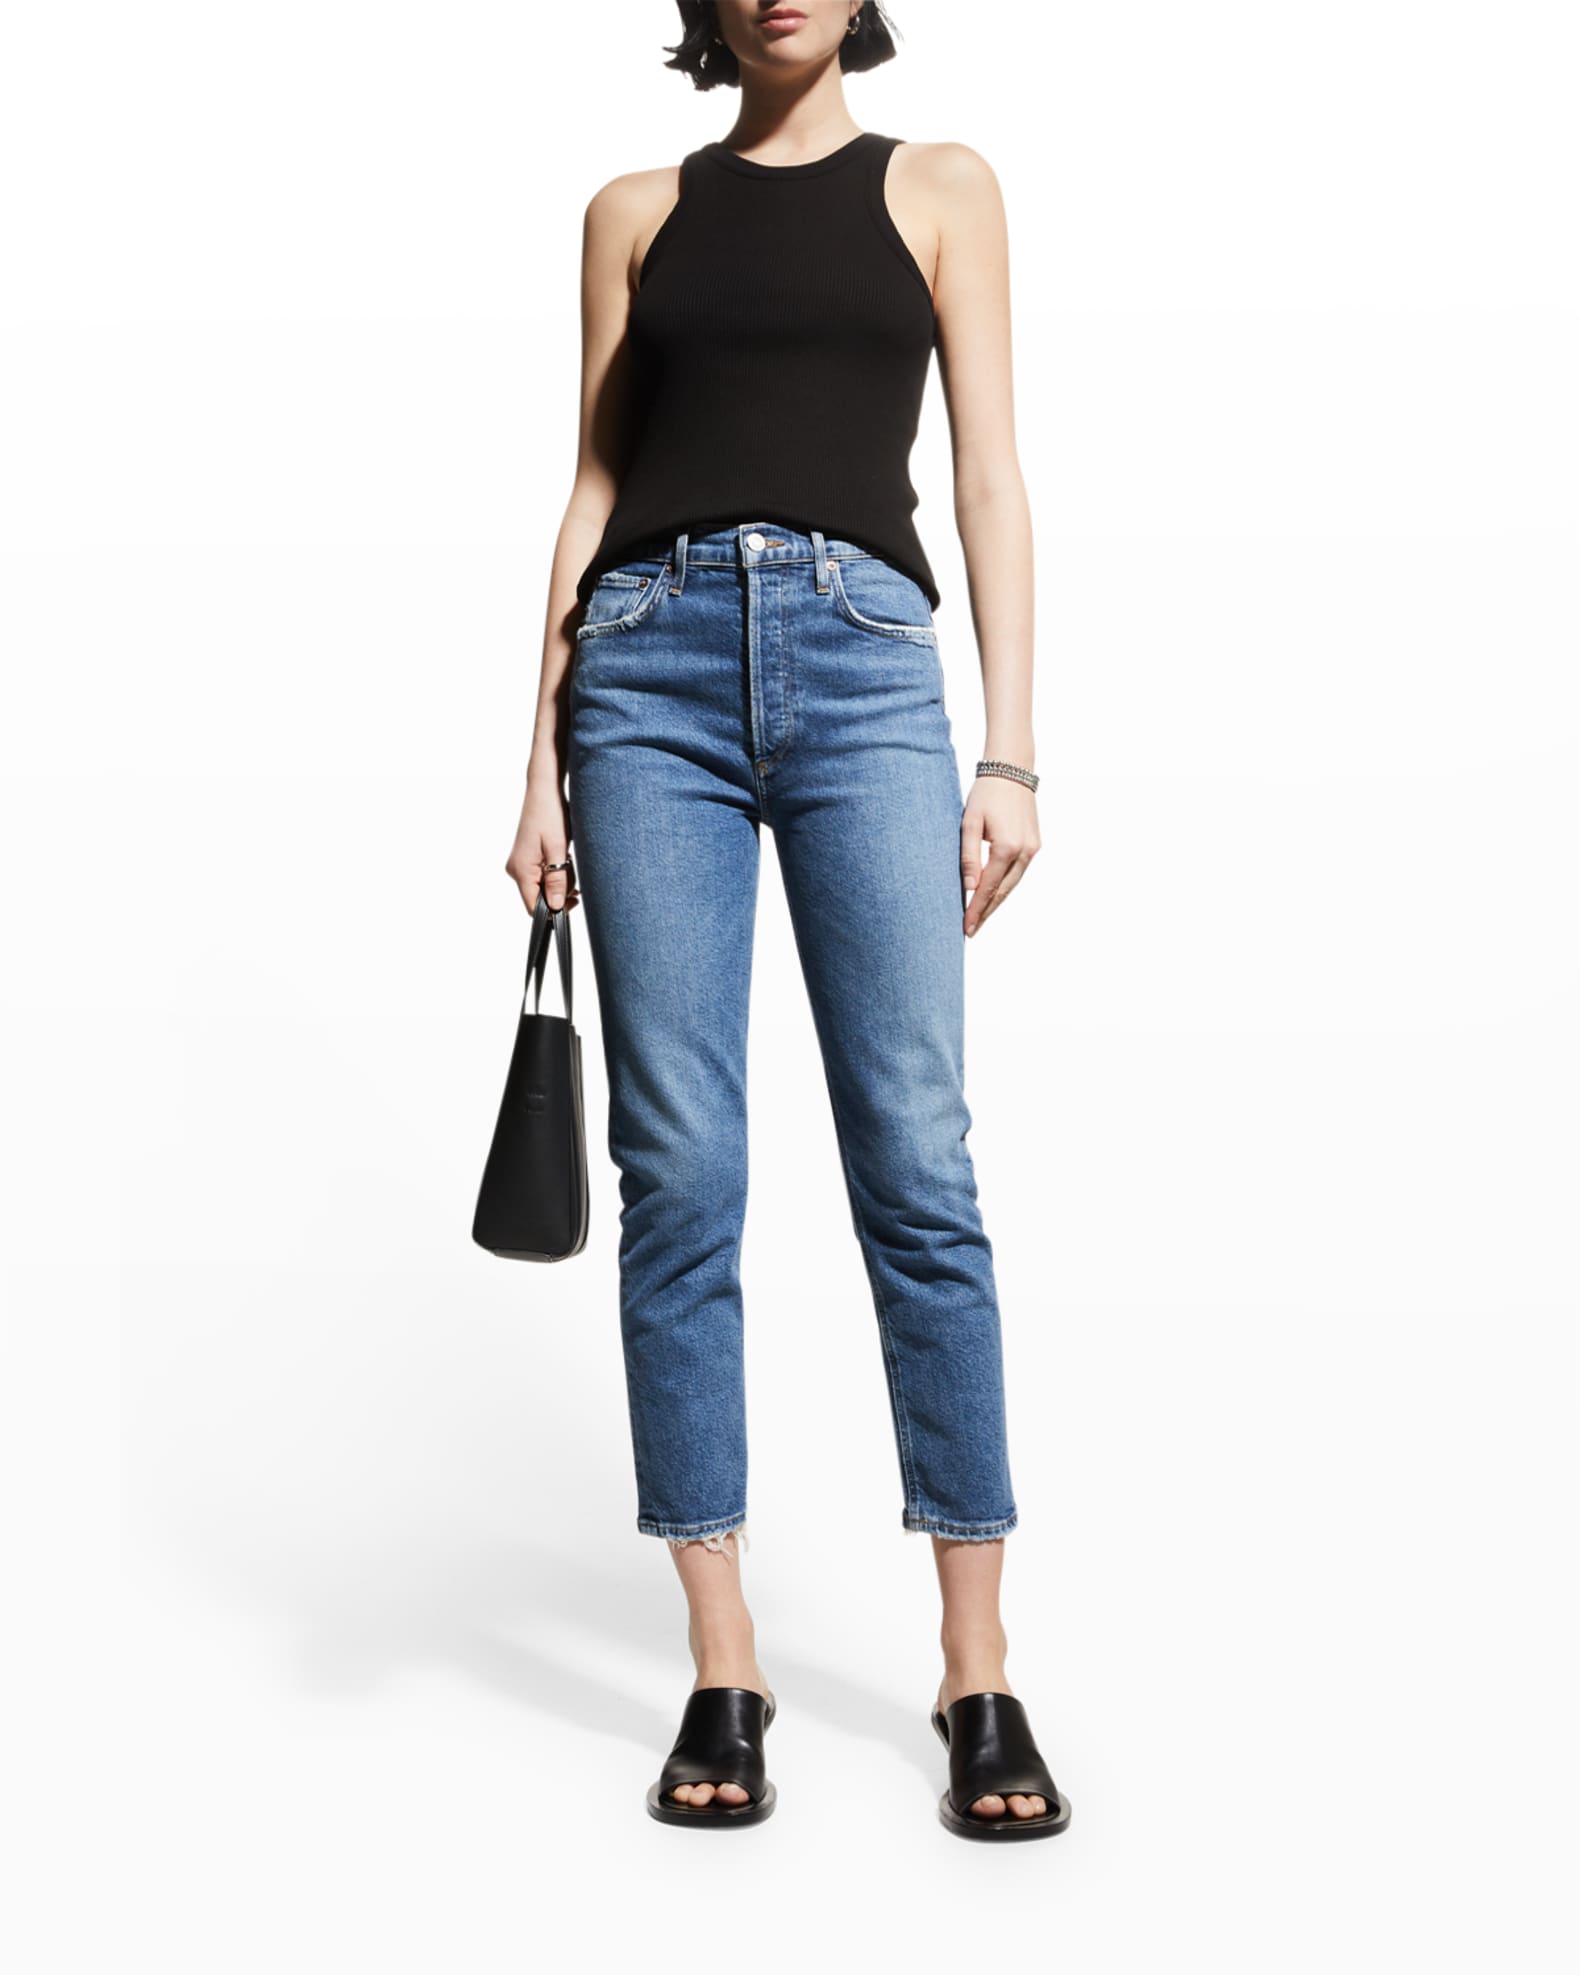 Her lip to Valencia High Rise Jeans 26